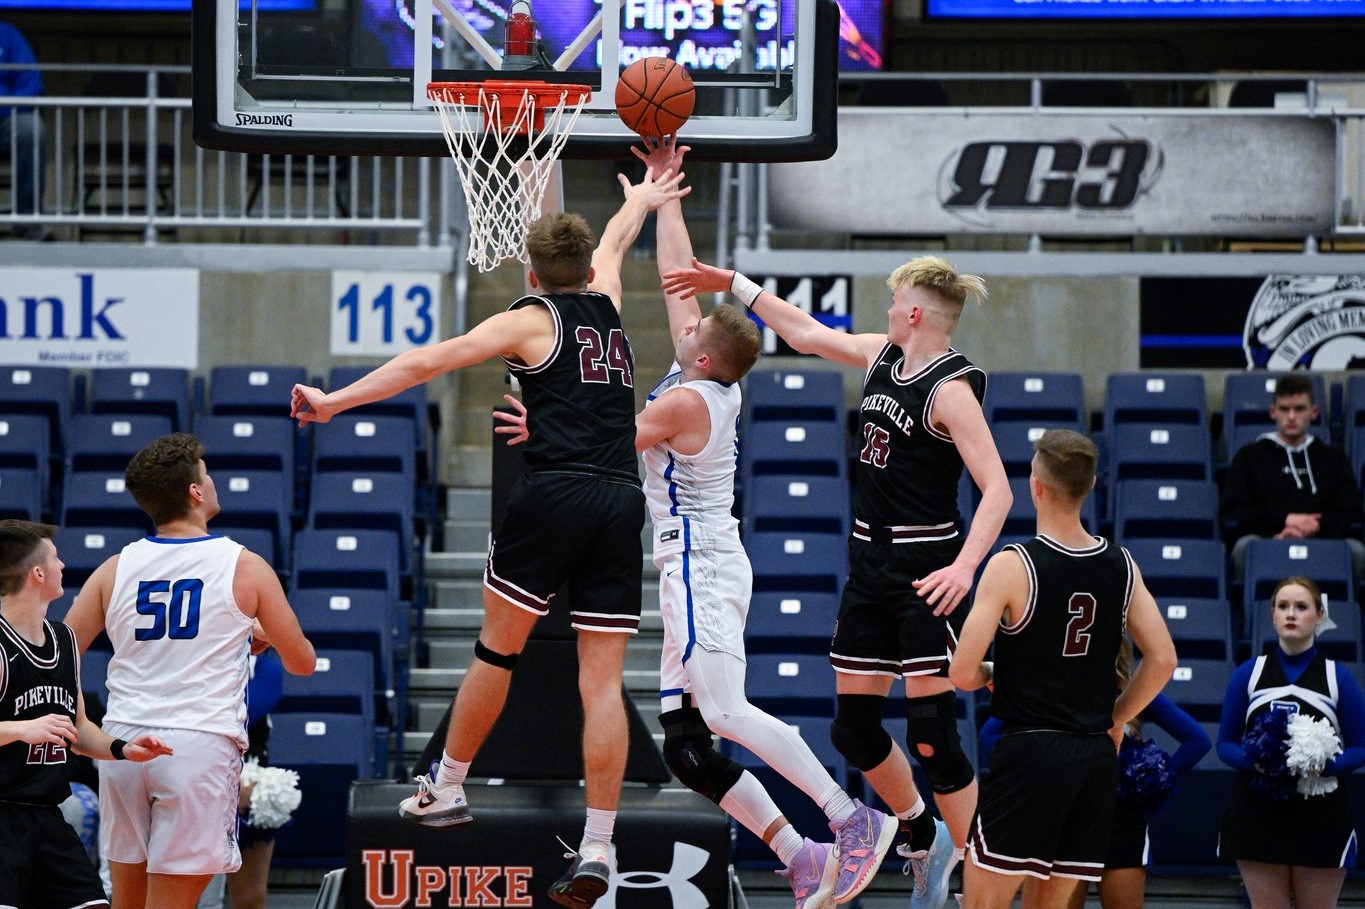 HIGH SCHOOL BASKETBALL: Pikeville beats Betsy Layne in All ‘A’ Classic title game